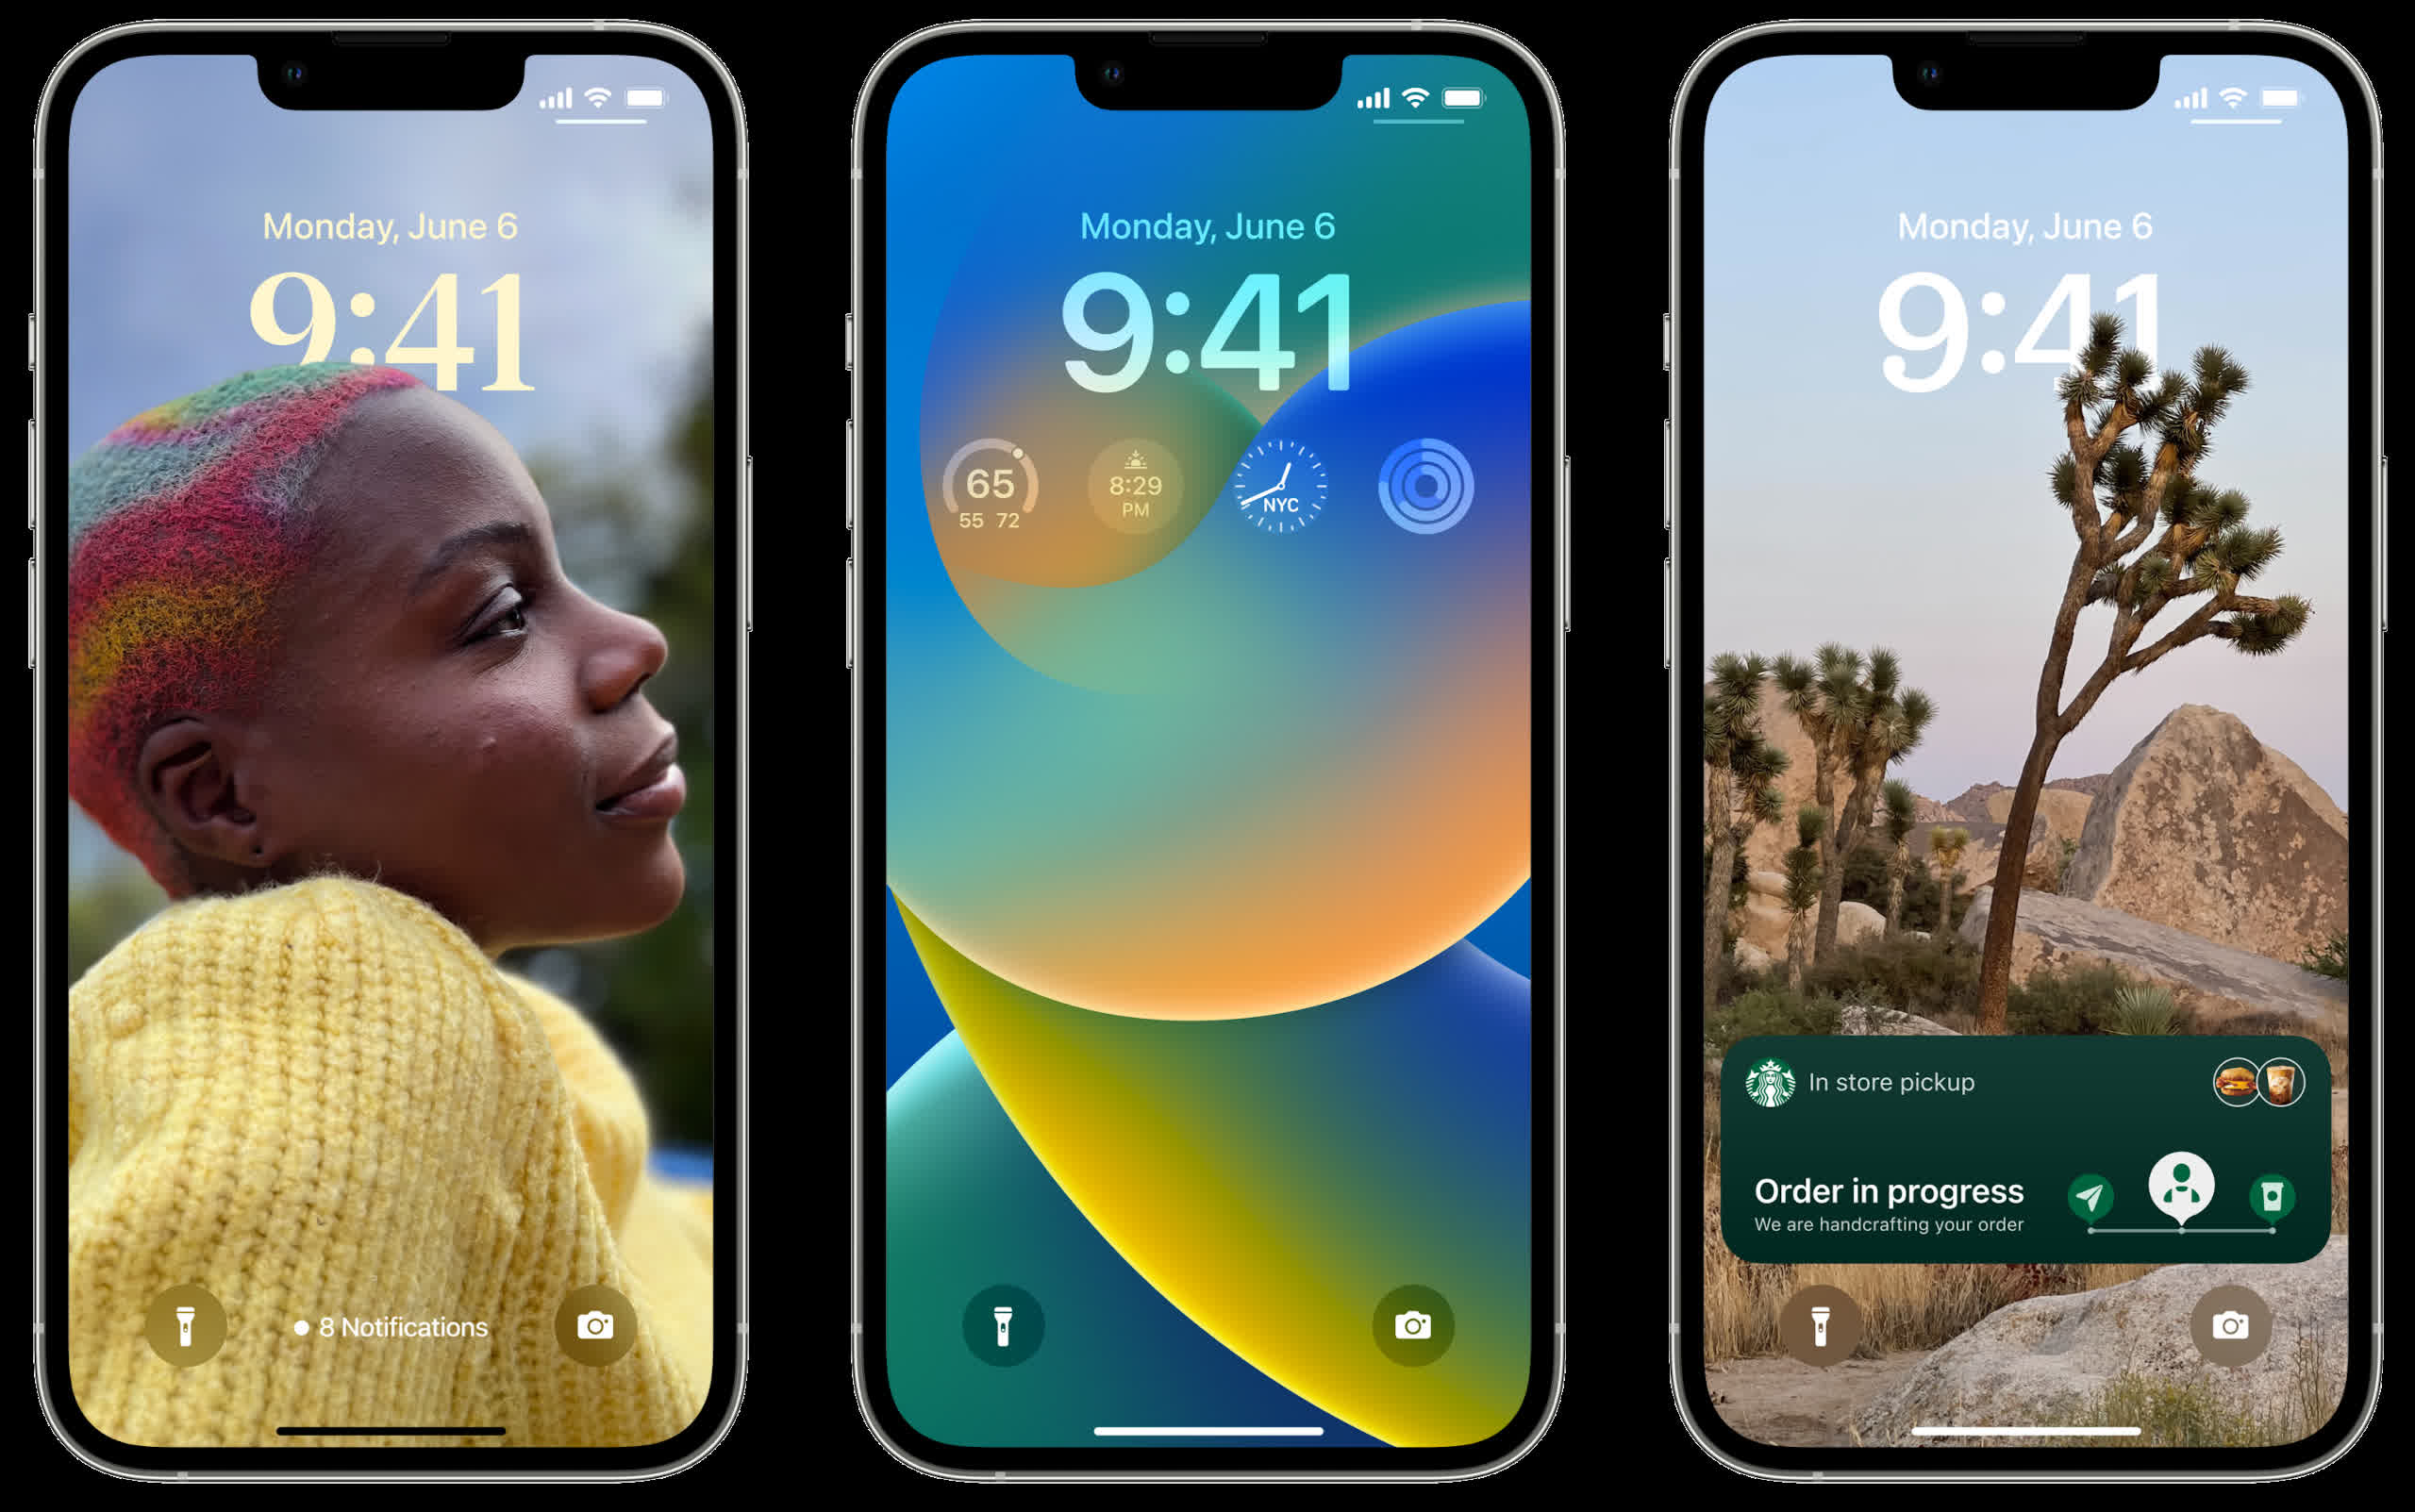 Apple unveils iOS 16 with a new lock screen, iCloud sharing, new mail tools, and much more